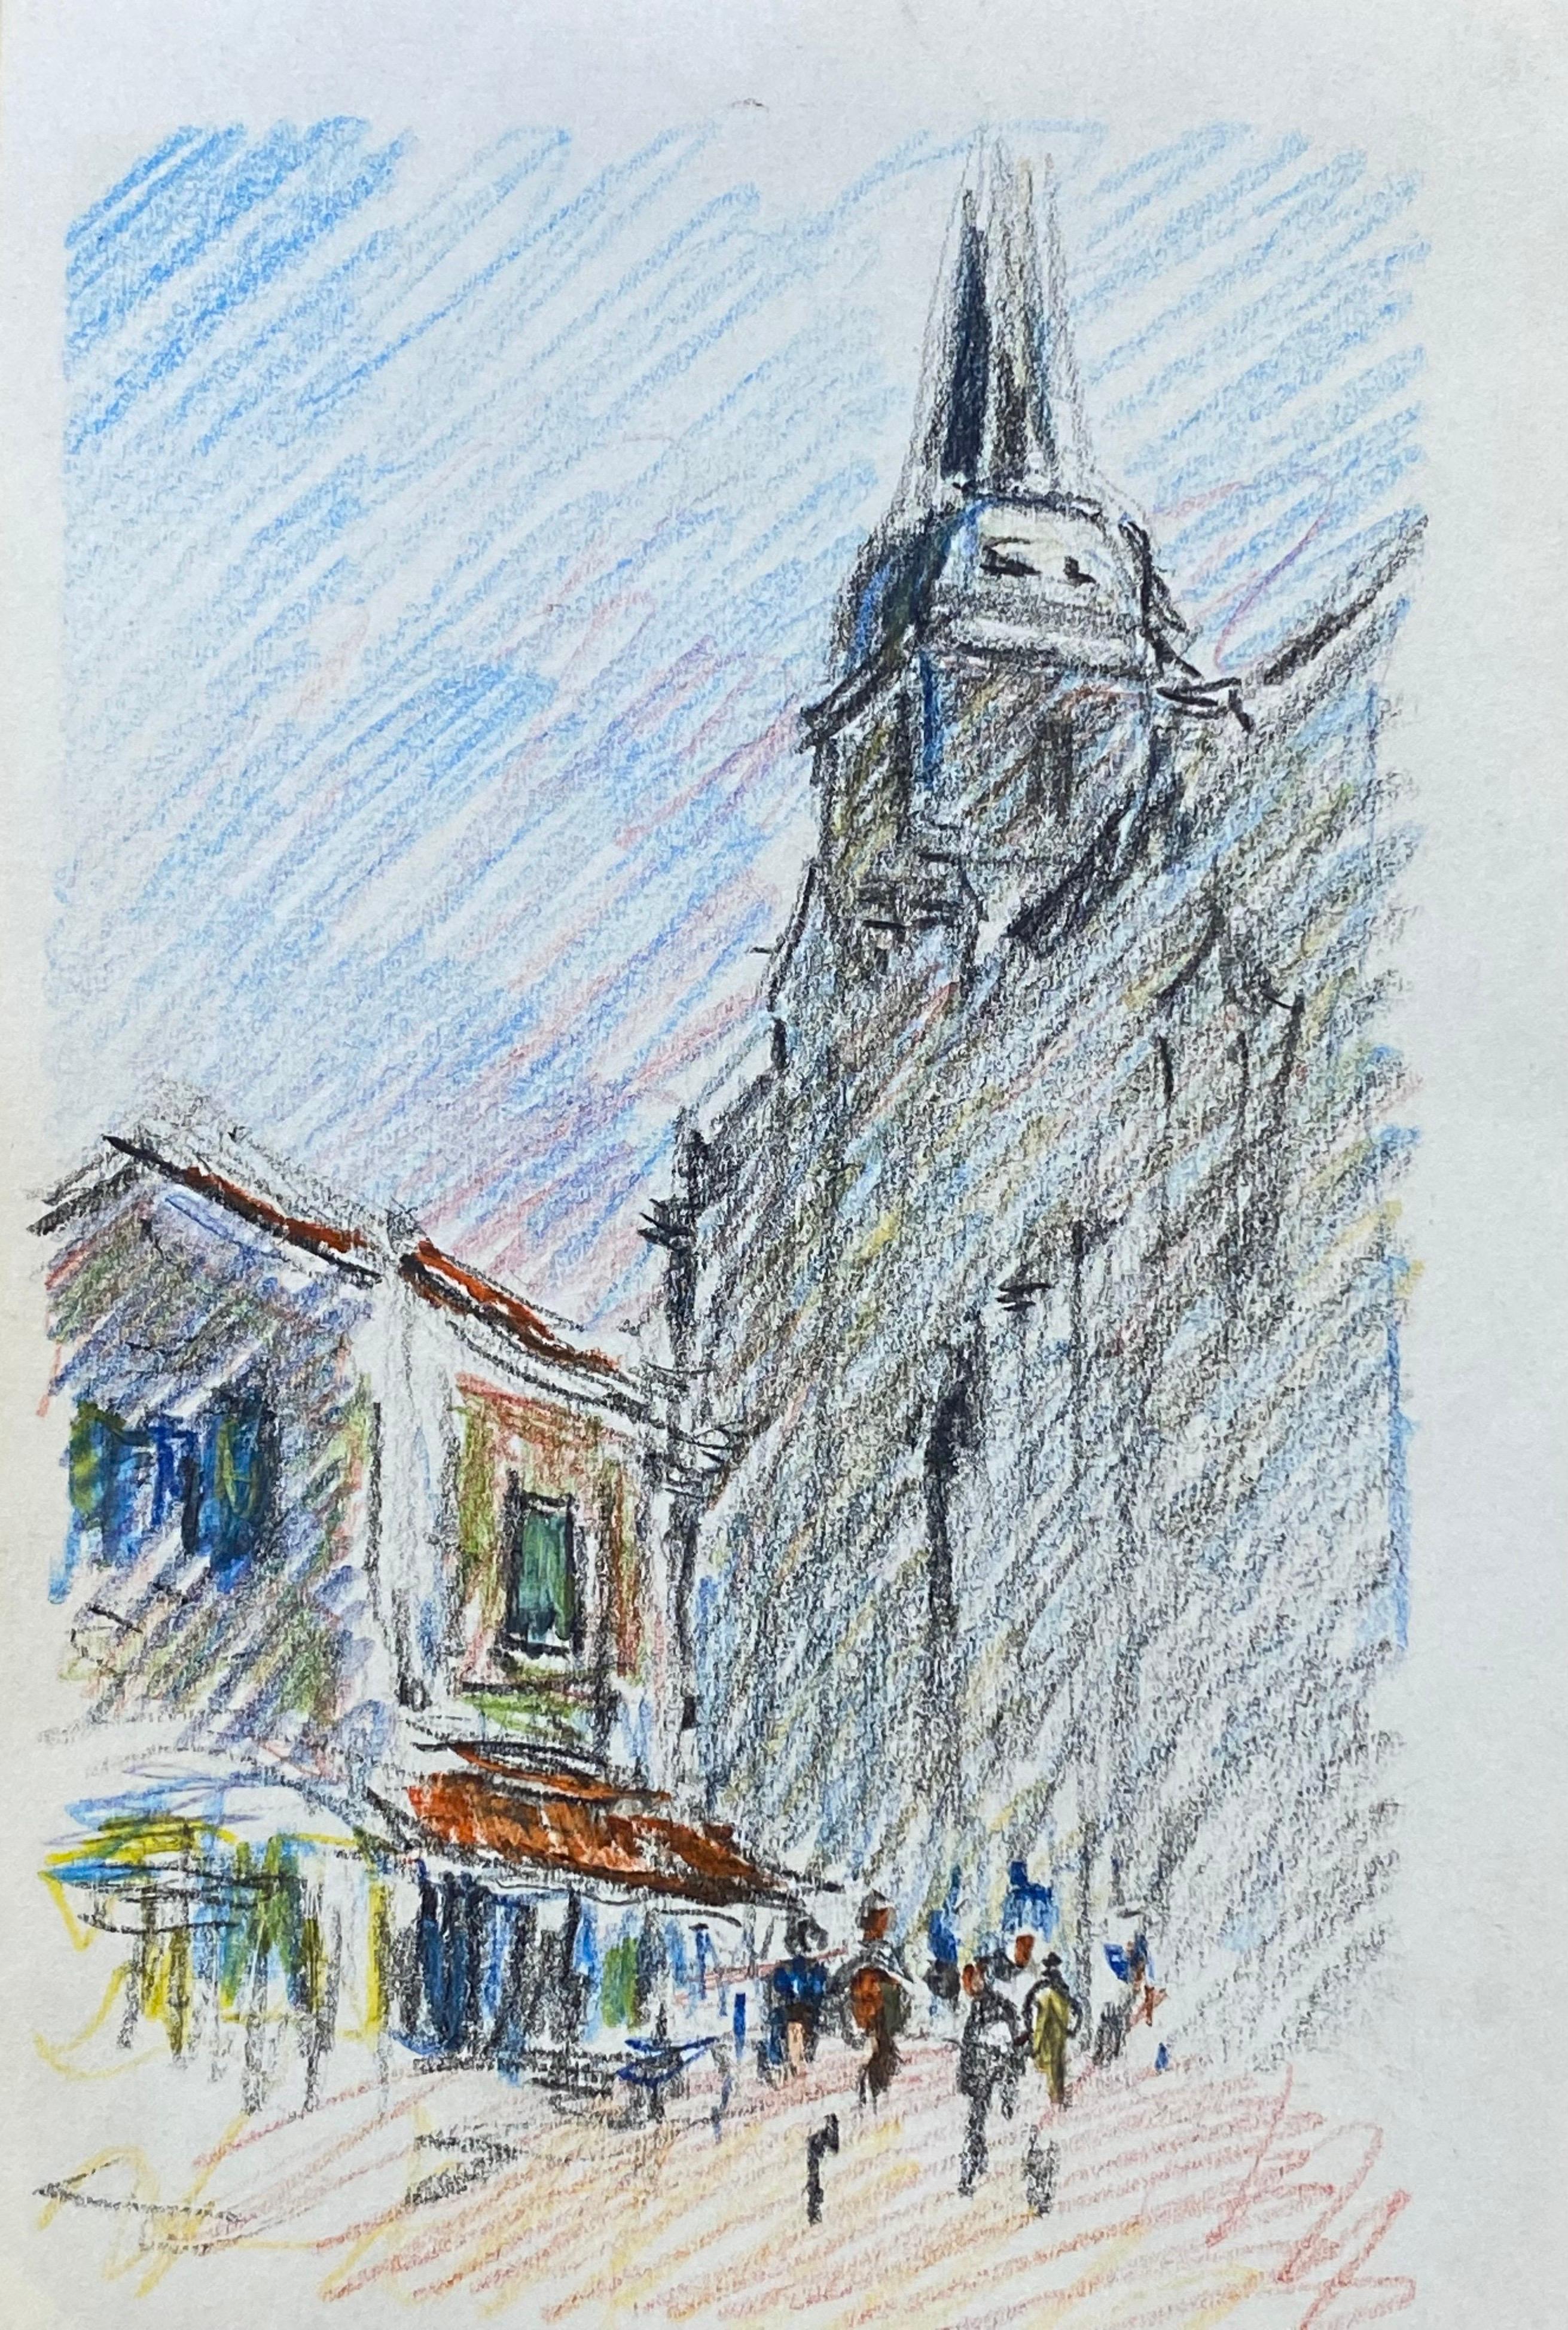 Camille Meriot Landscape Art - OLD PROVENCE TOWN Impressionist Crayon Drawing - Figures Mooching by Cafe